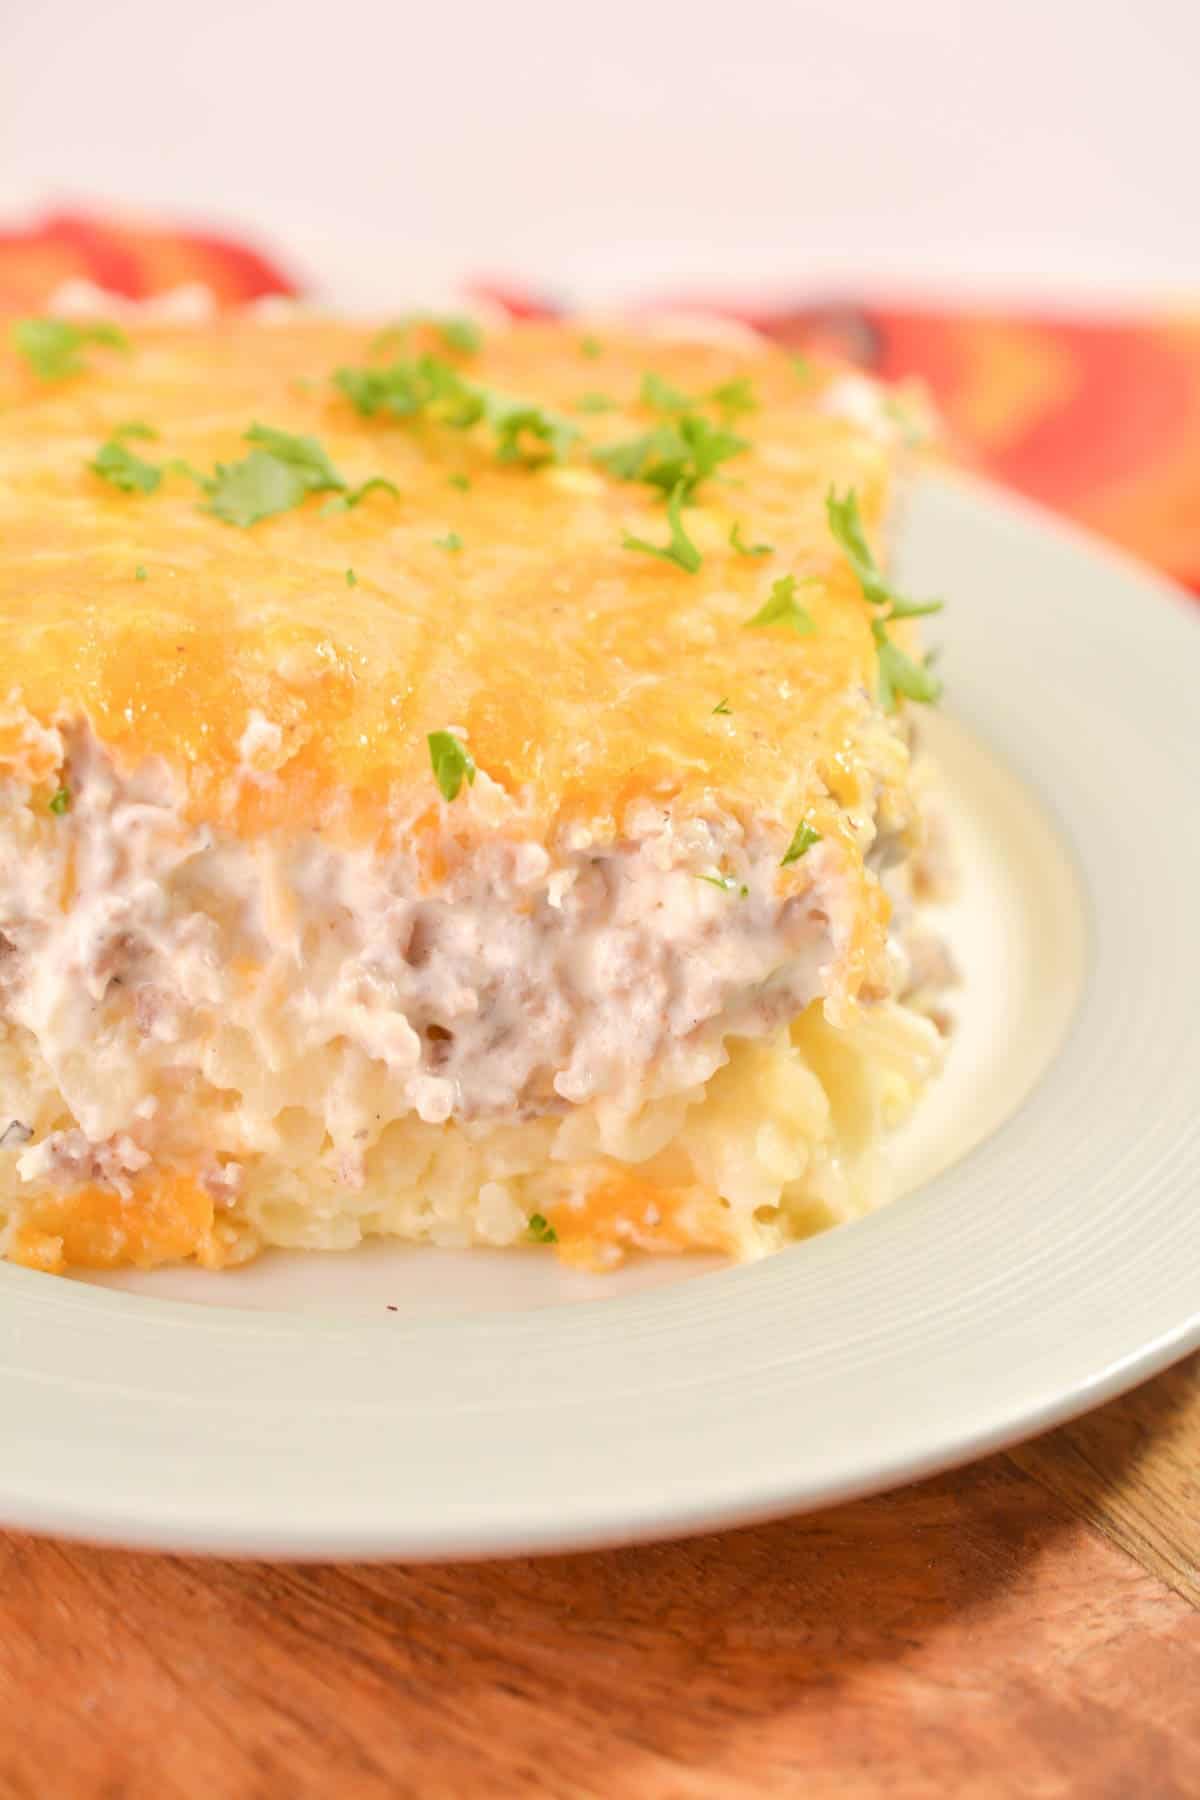 Sausage, Egg and Cream Cheese Hashbrown Casserole